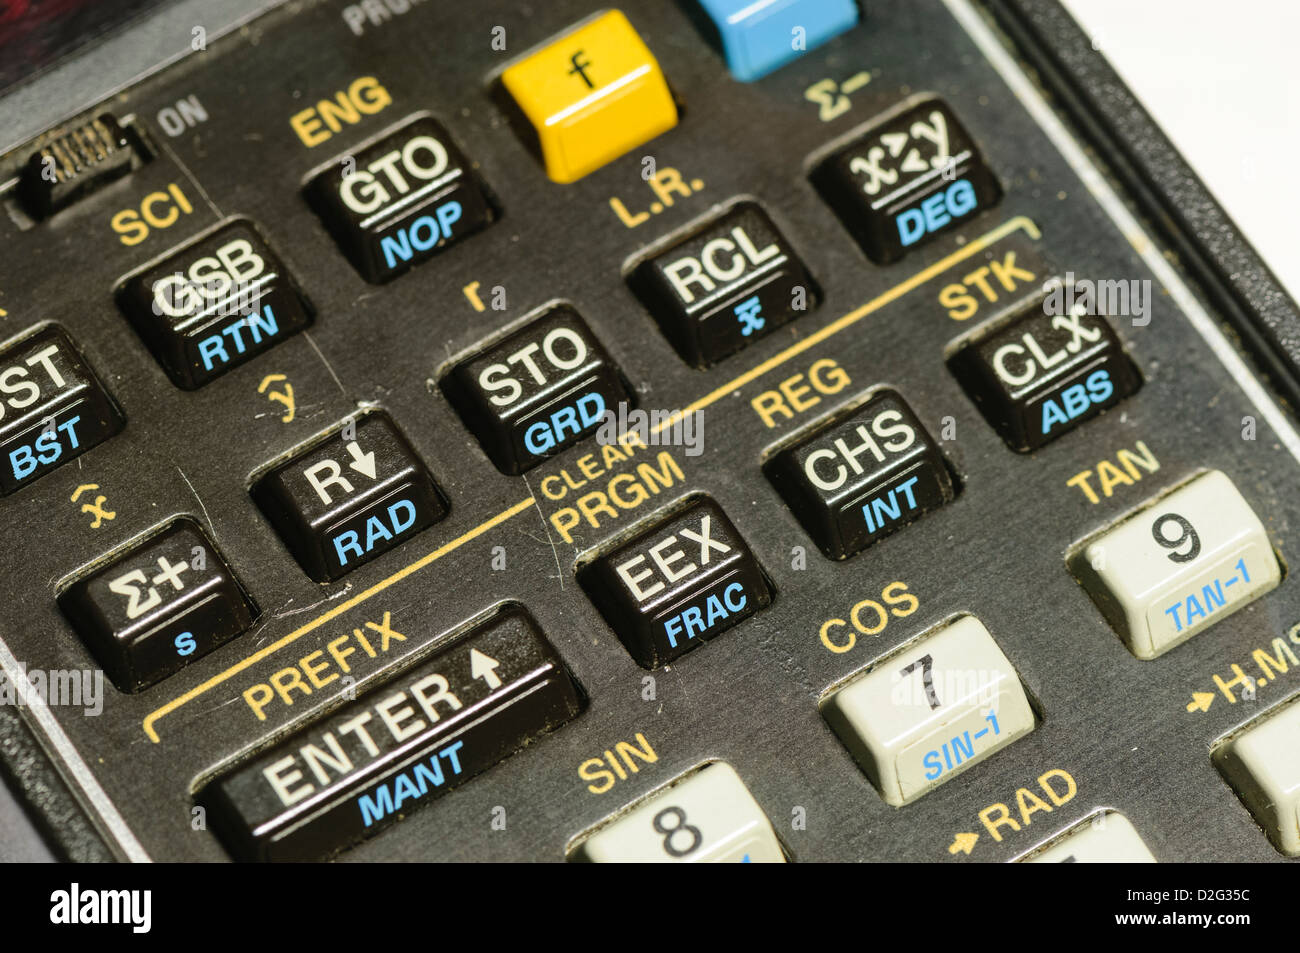 Hewlett Packard HP-33E programmable scientific calculator from 1978, which uses Reverse Polish Notation Stock Photo